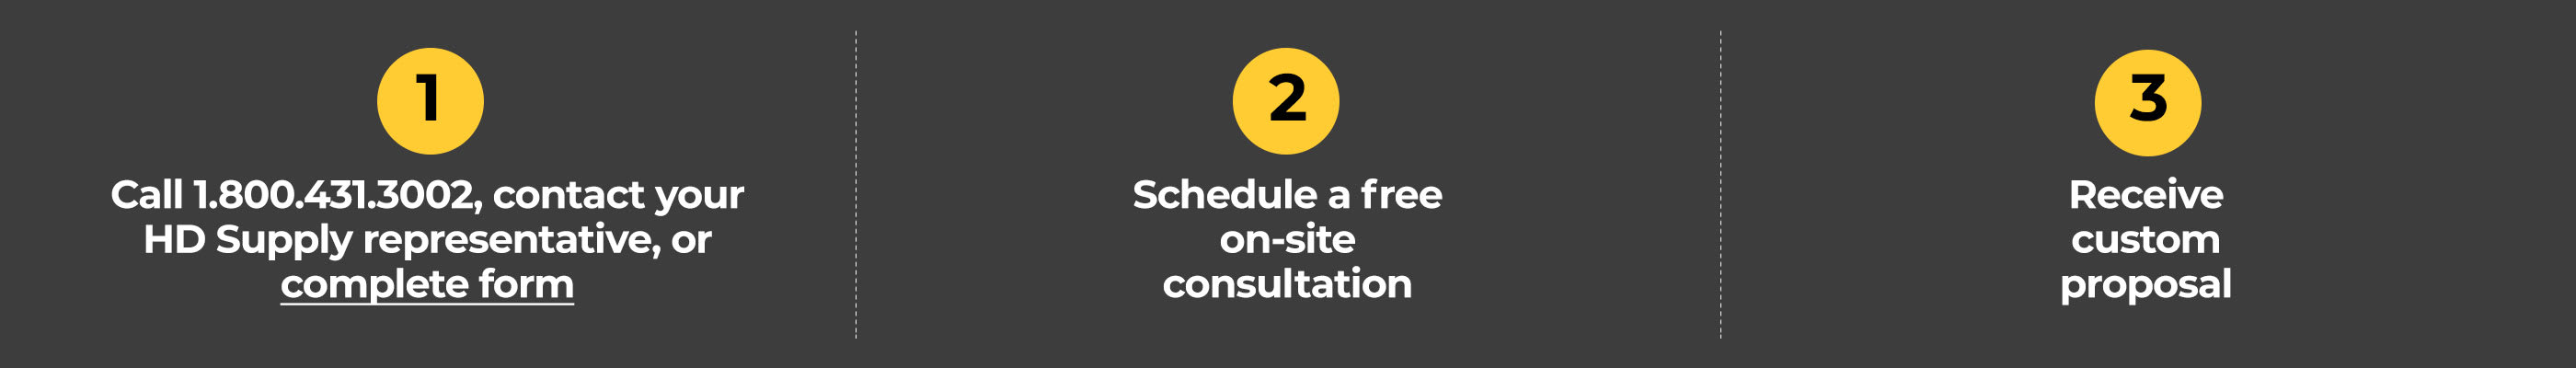 Get Started With Consultation